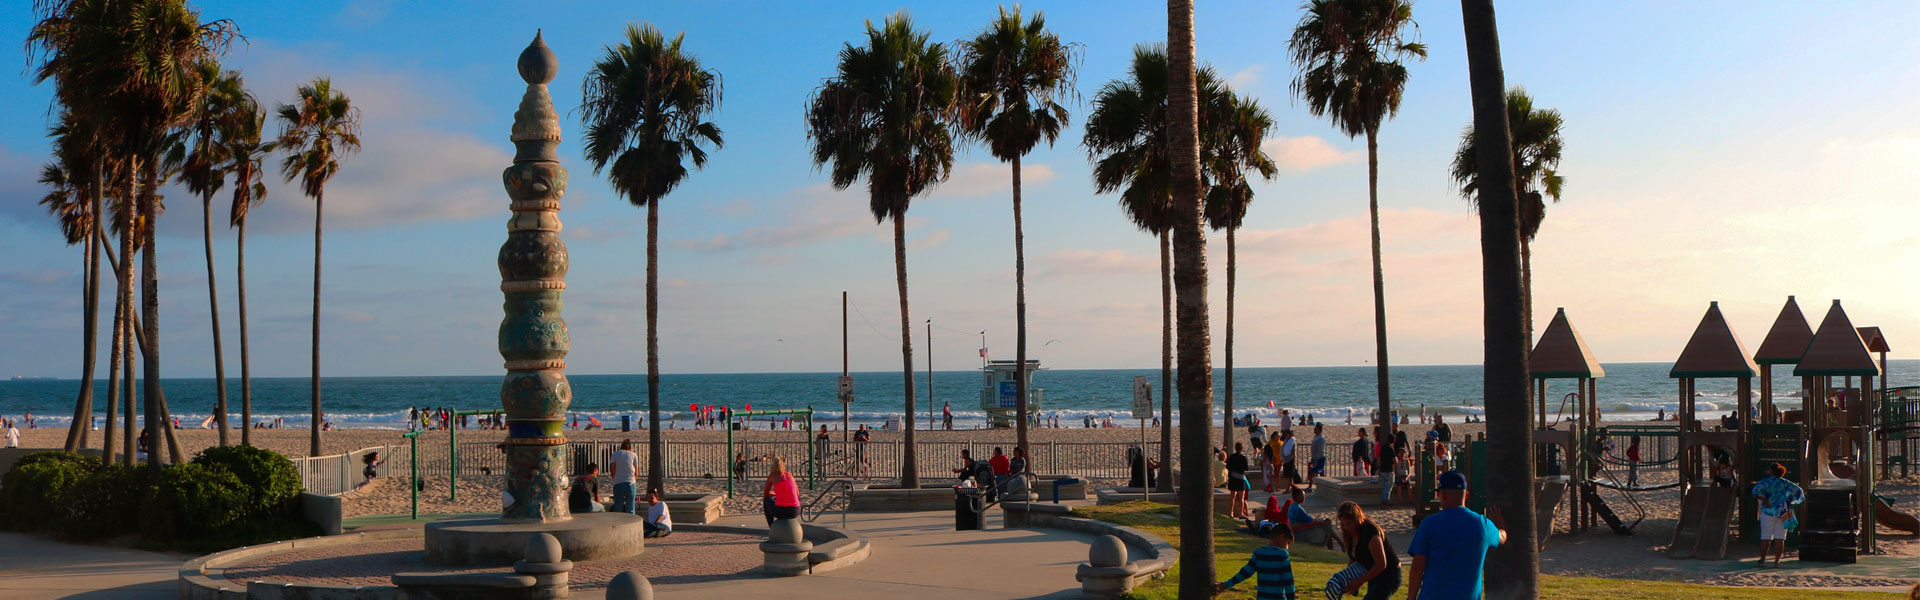 Things to Do in Los Angeles | See More with Big Bus Tours